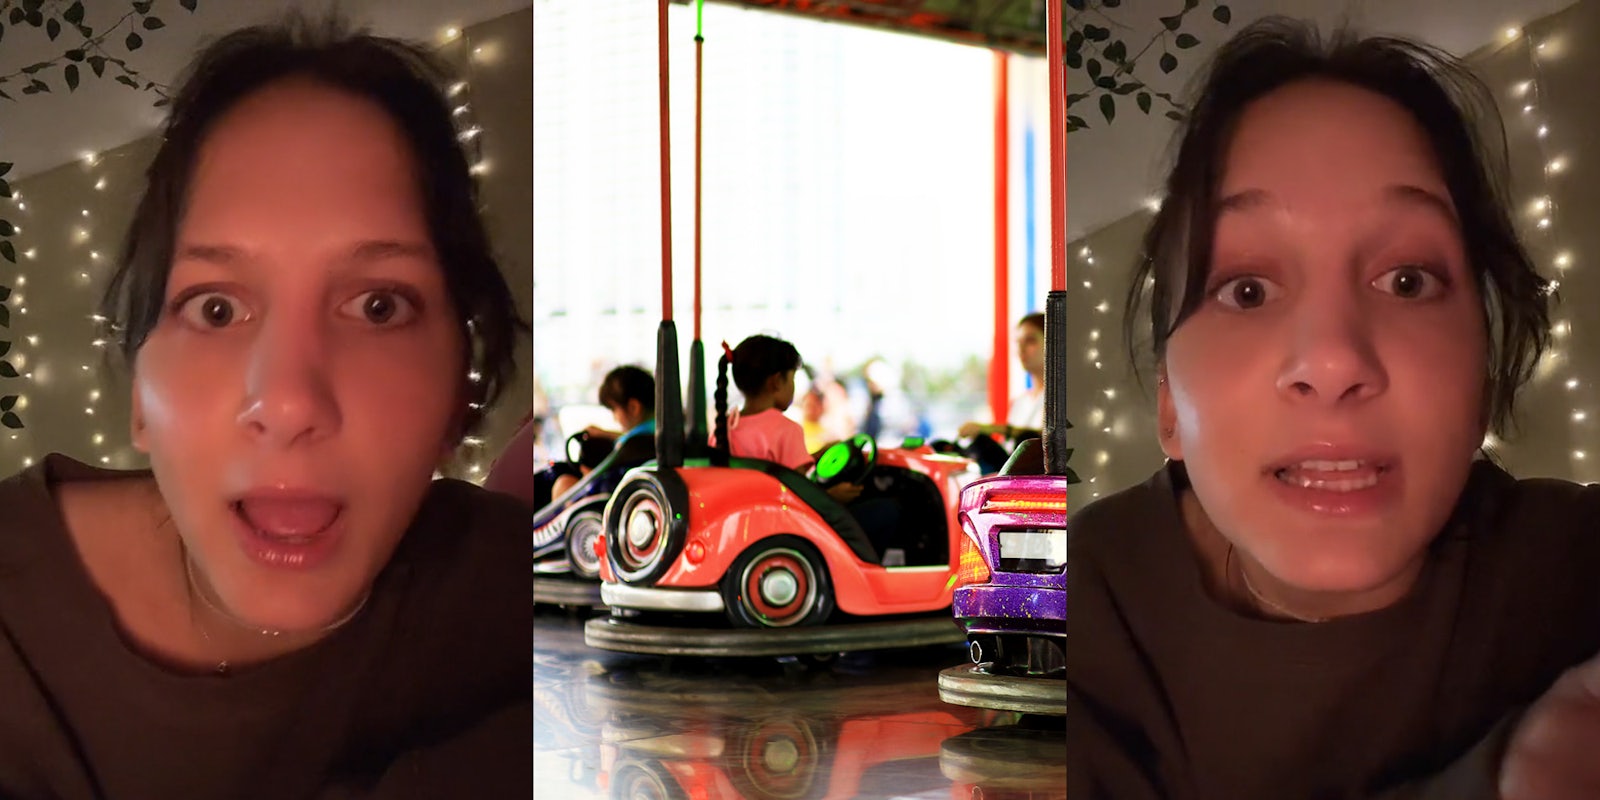 woman shocked expression speaking (l) bumper cars (c) woman speaking upset (r)